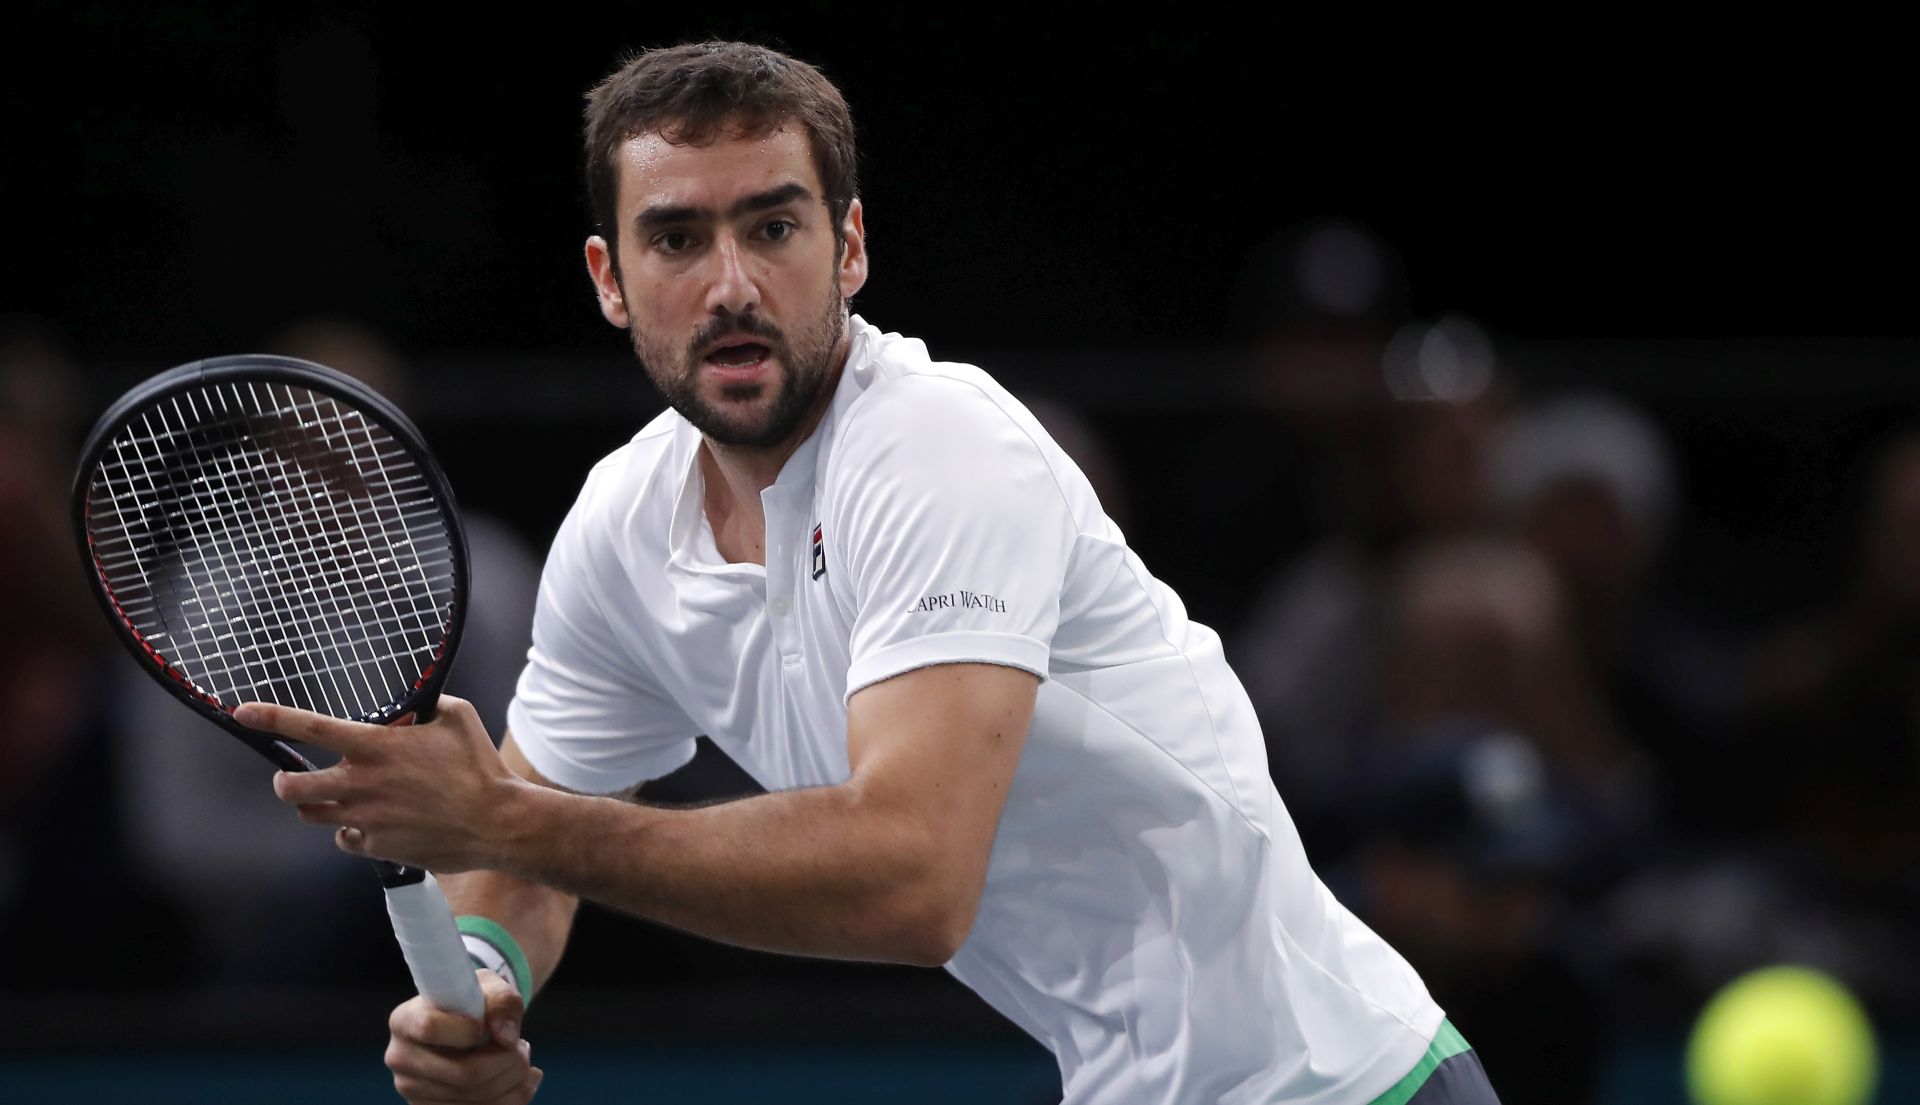 epa07134808 Marin Cilic of Croatia in action during his third round match against Grigor Dimitrov (unseen) of Bulgaria at the Rolex Paris Masters tennis tournament in Paris, France, 01 November 2018.  EPA/CHRISTOPHE PETIT TESSON